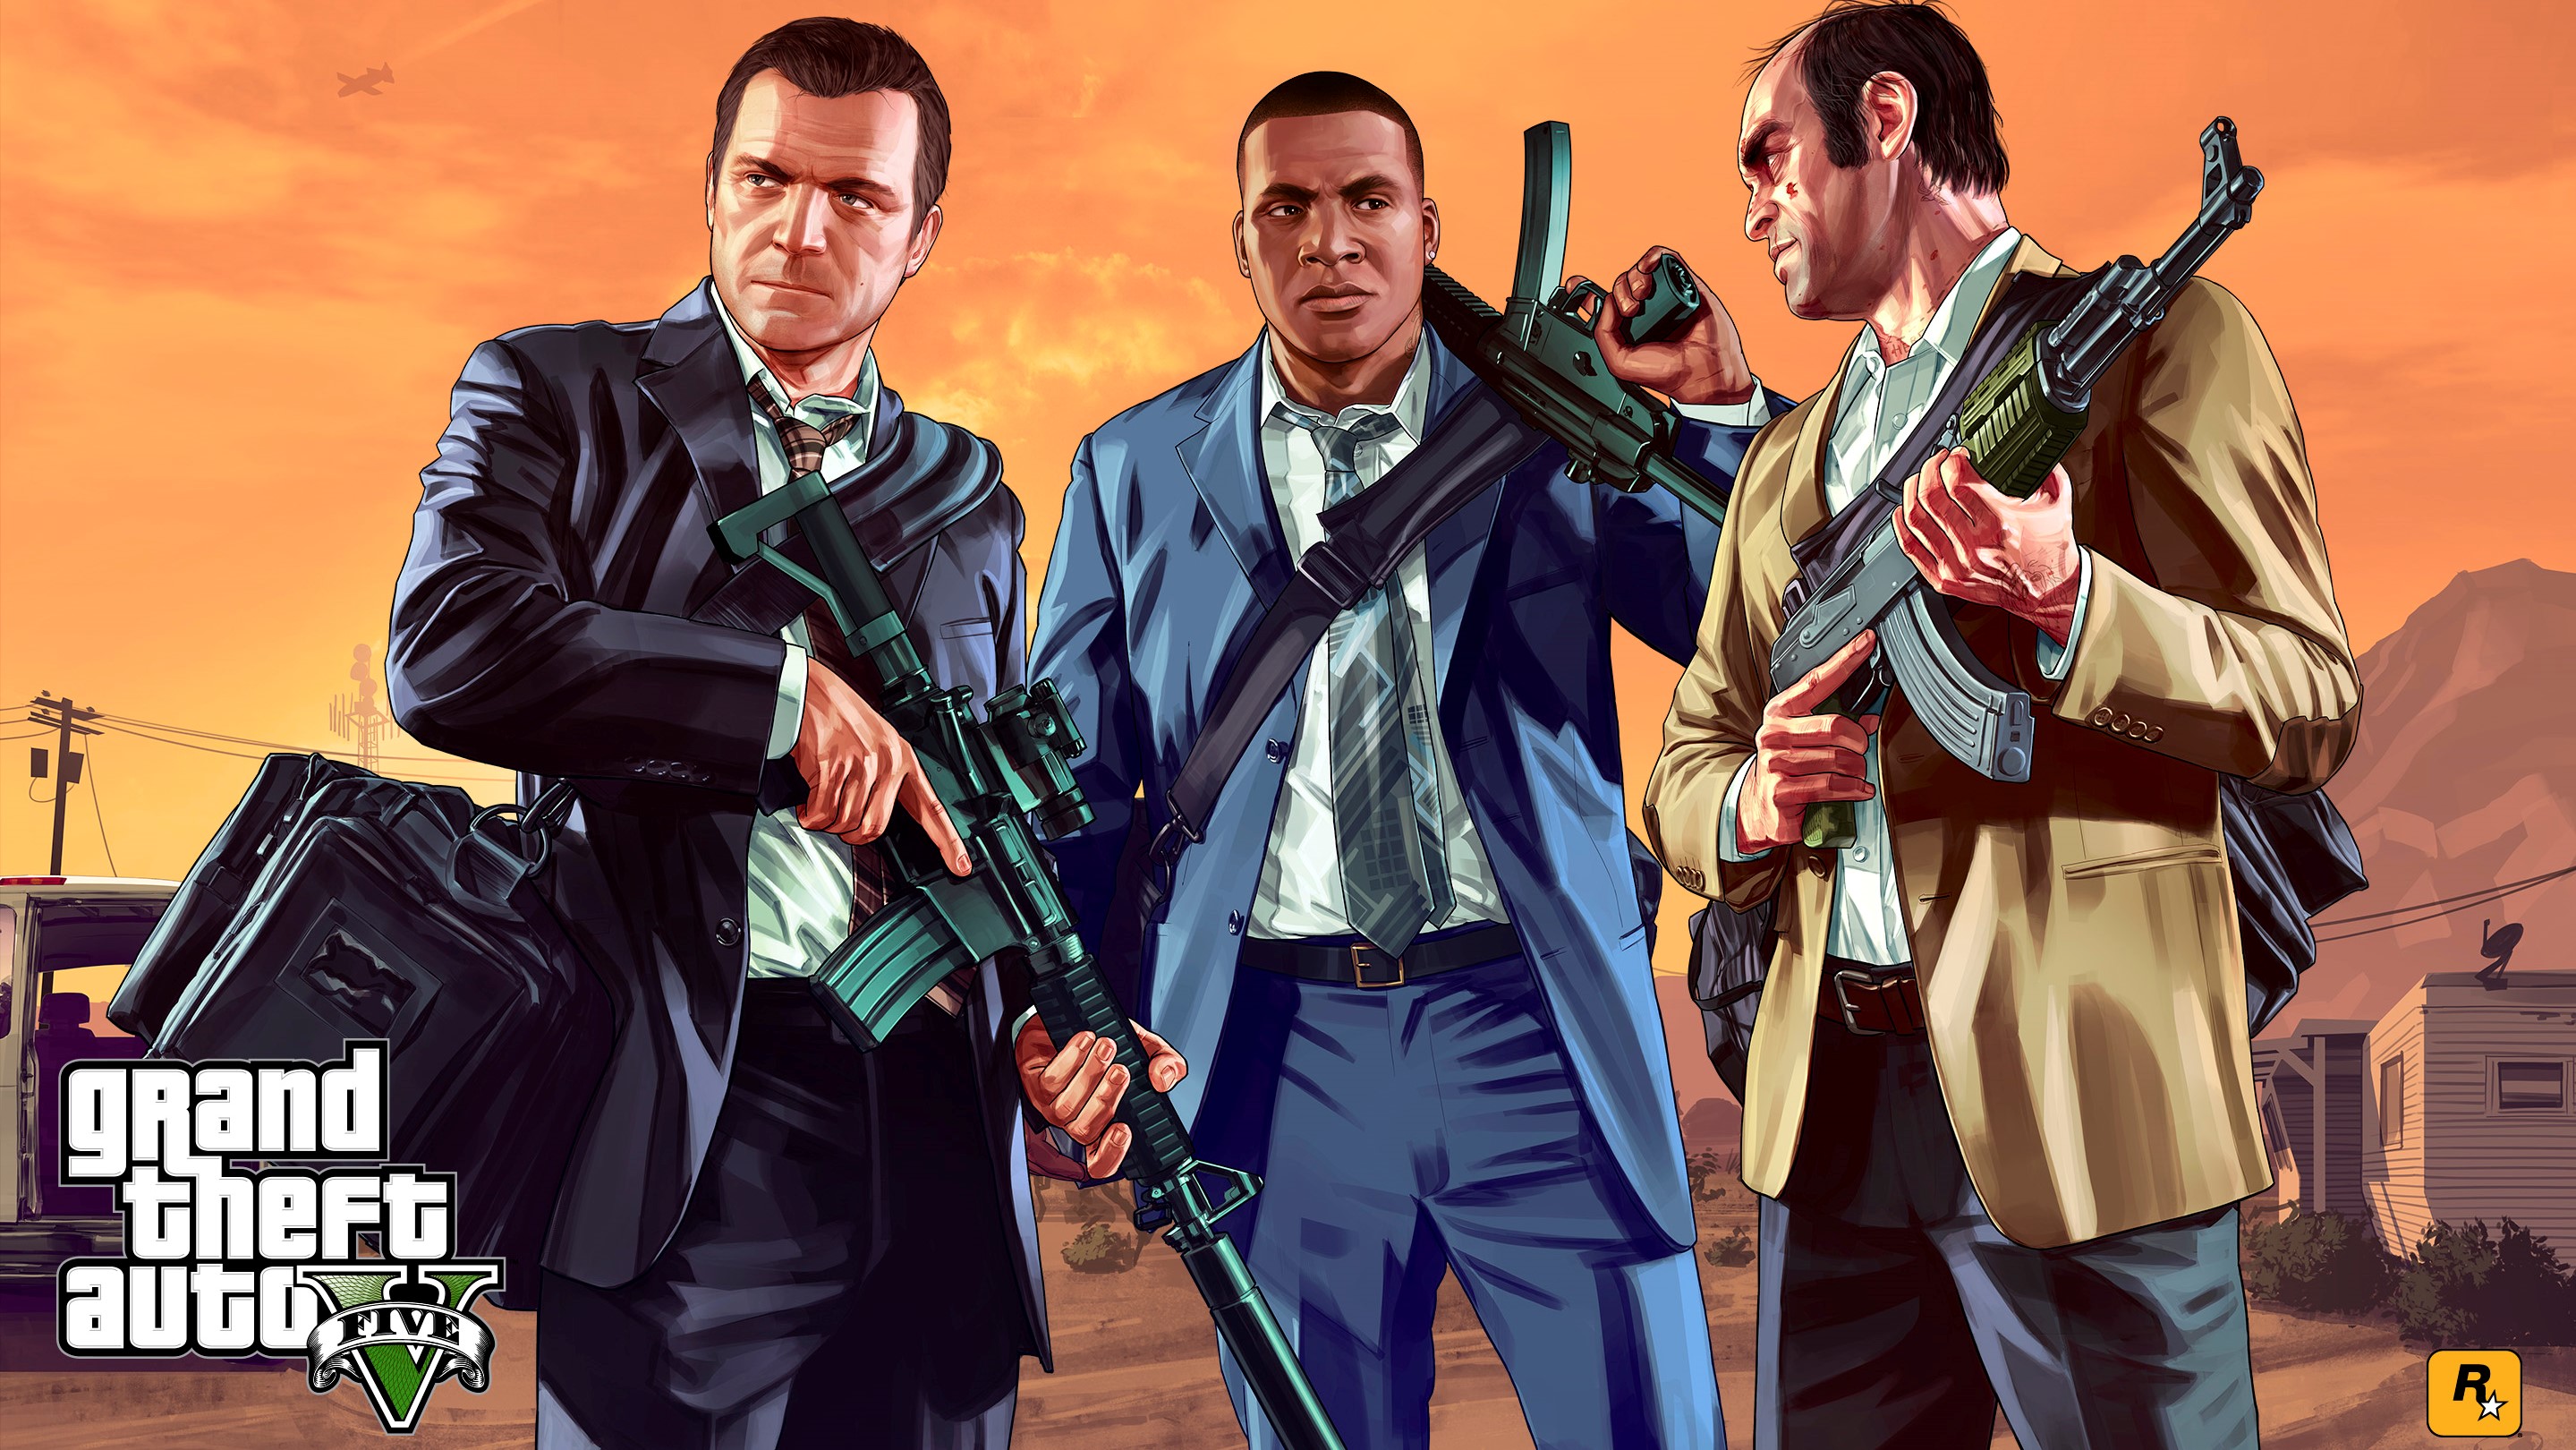 Grand Theft Auto V (PS5) (4 stores) see prices now »